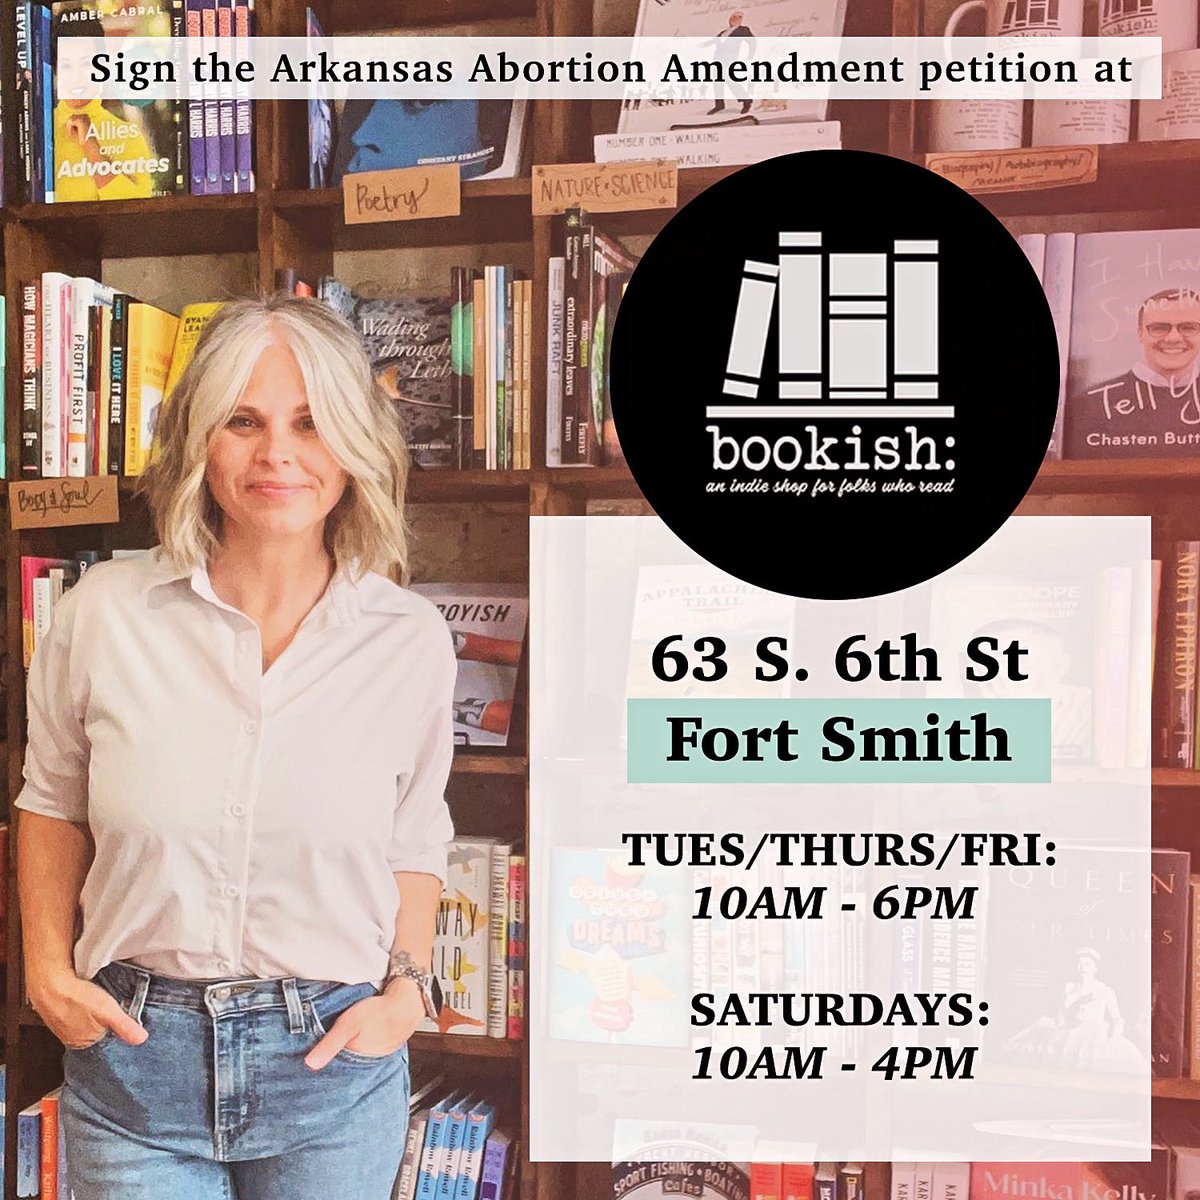 Hey Sebastian Co / Fort Smith! Y’all have a permanent location where you can sign the #ARAbortionAmendment. 

Stop by Bookish, an awesome independent bookstore, Tuesdays/Thursdays/Fridays from 10-6 and Saturdays from 10-4 to sign the petition and snag a great new book. #arpx